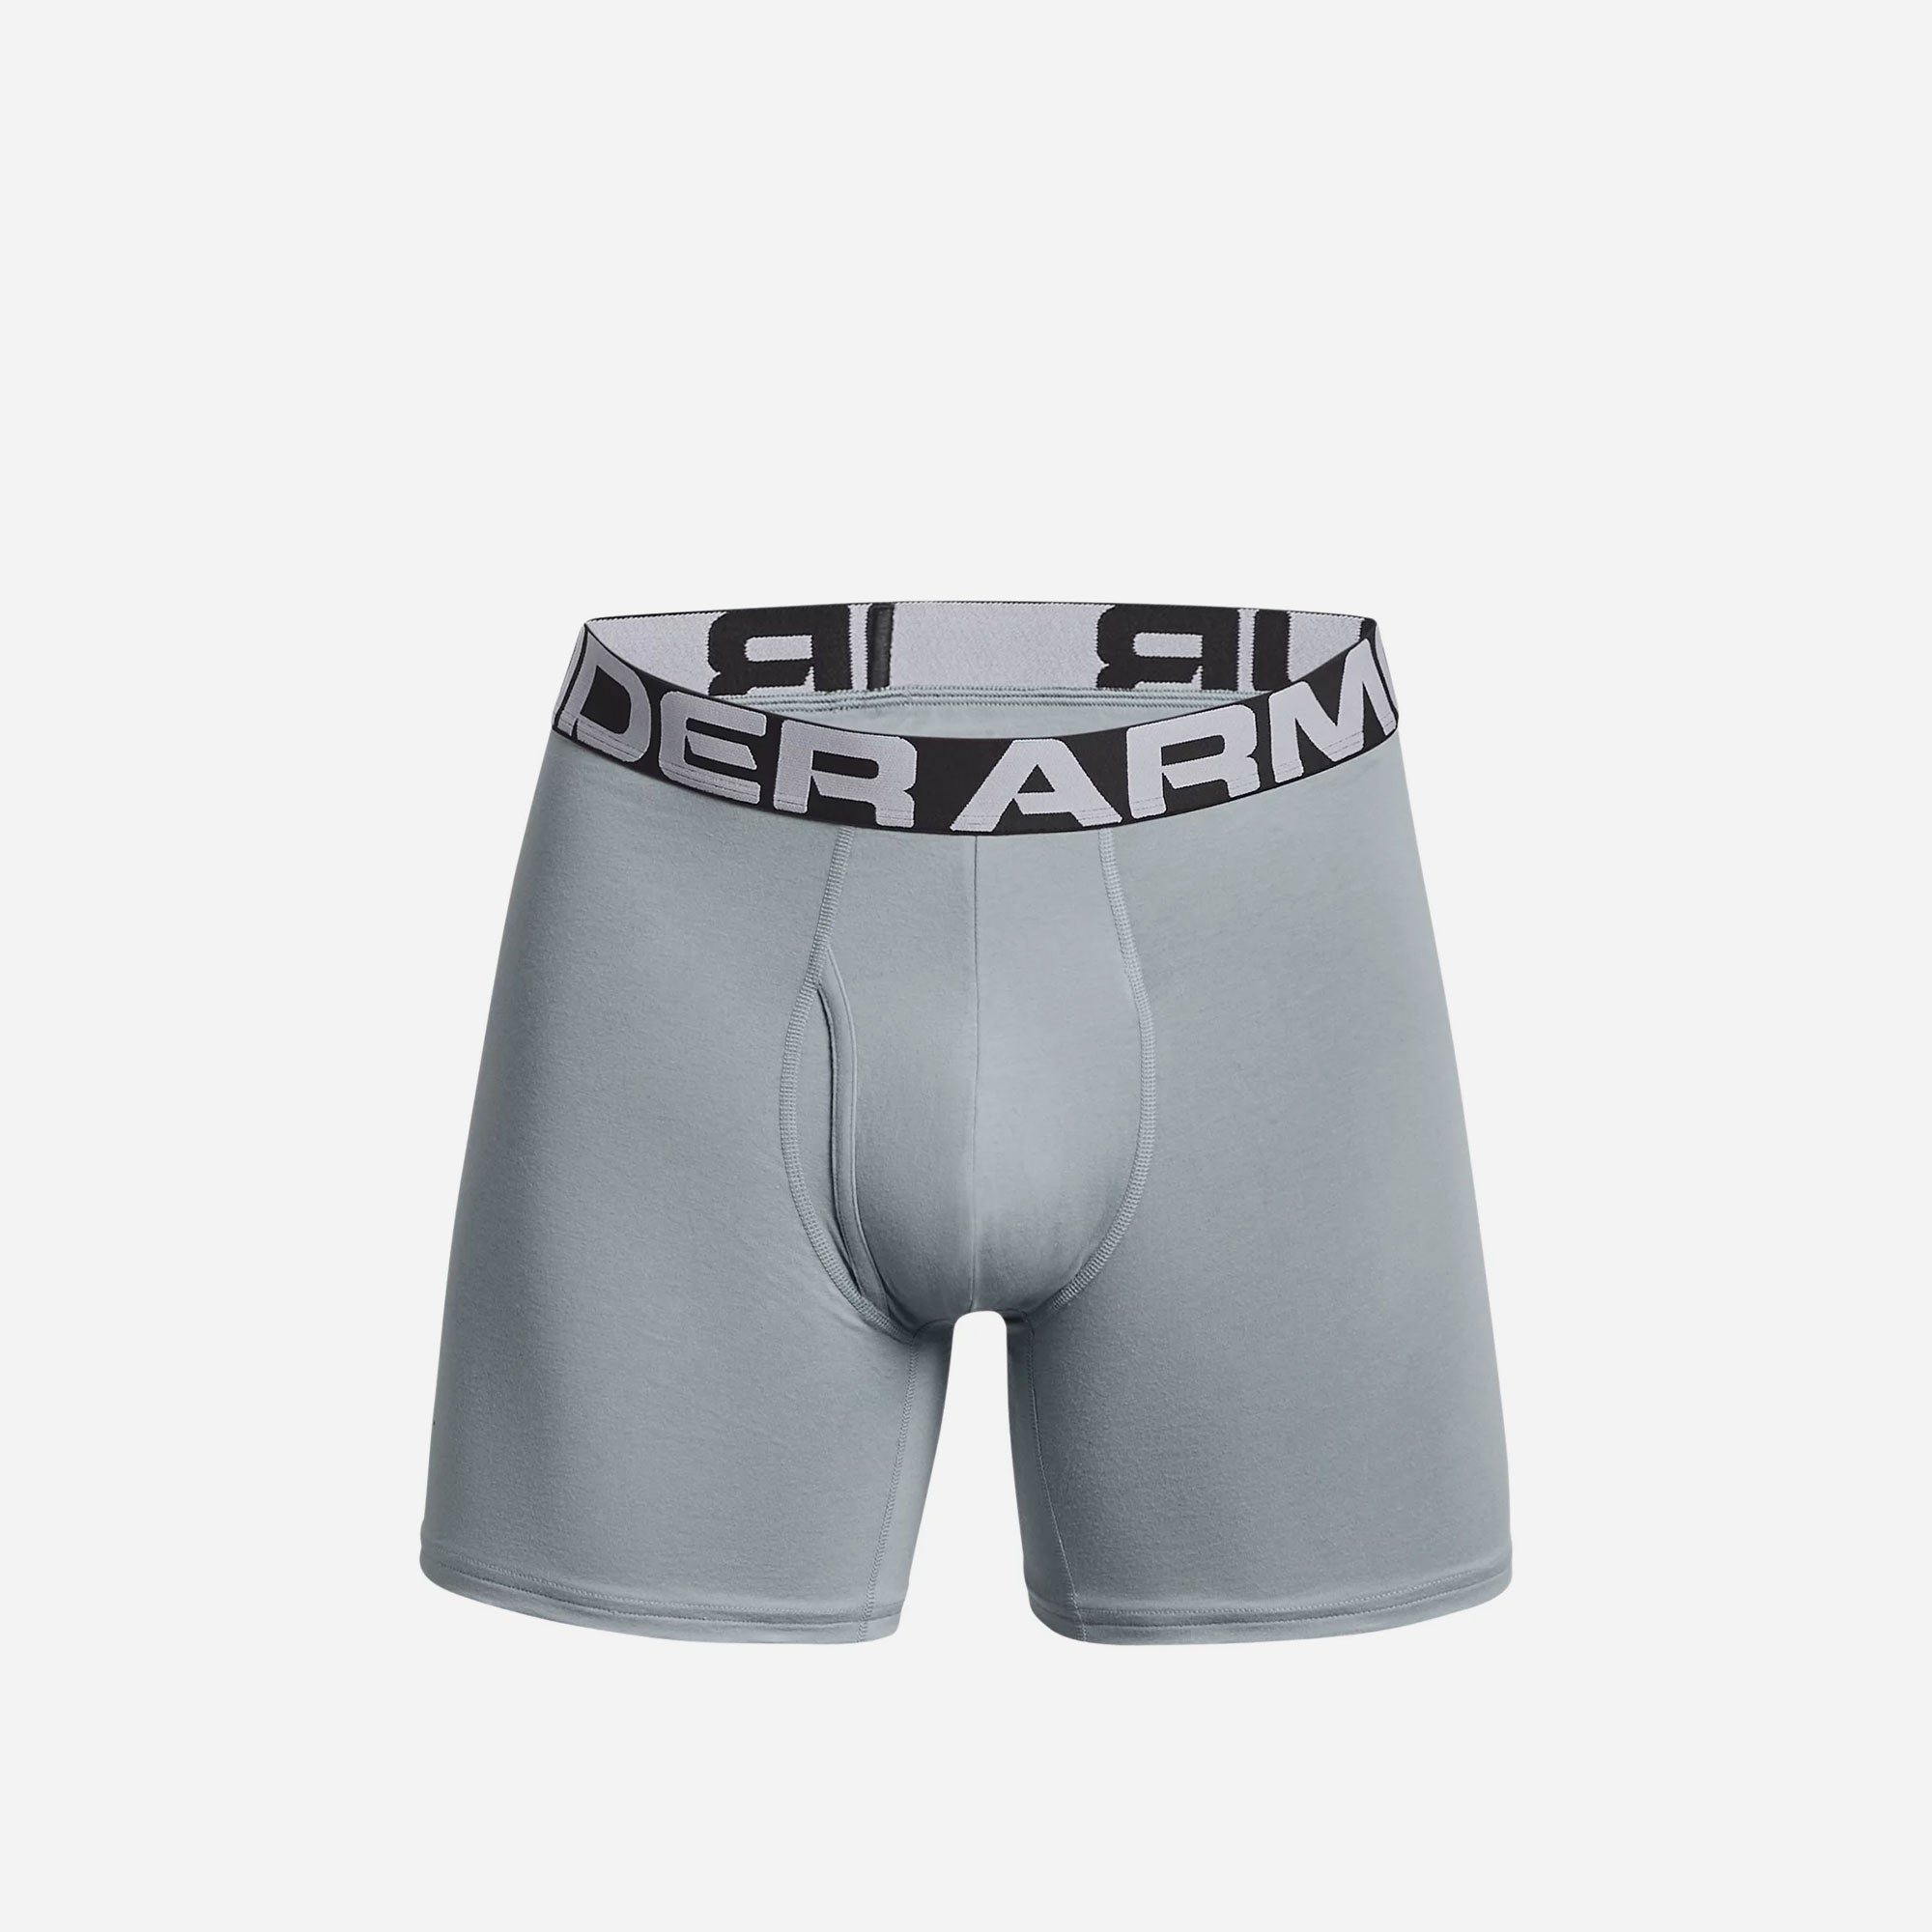 Under Armour Charged Cotton Boxerjock 3-Pack Greys 1363616-010 at